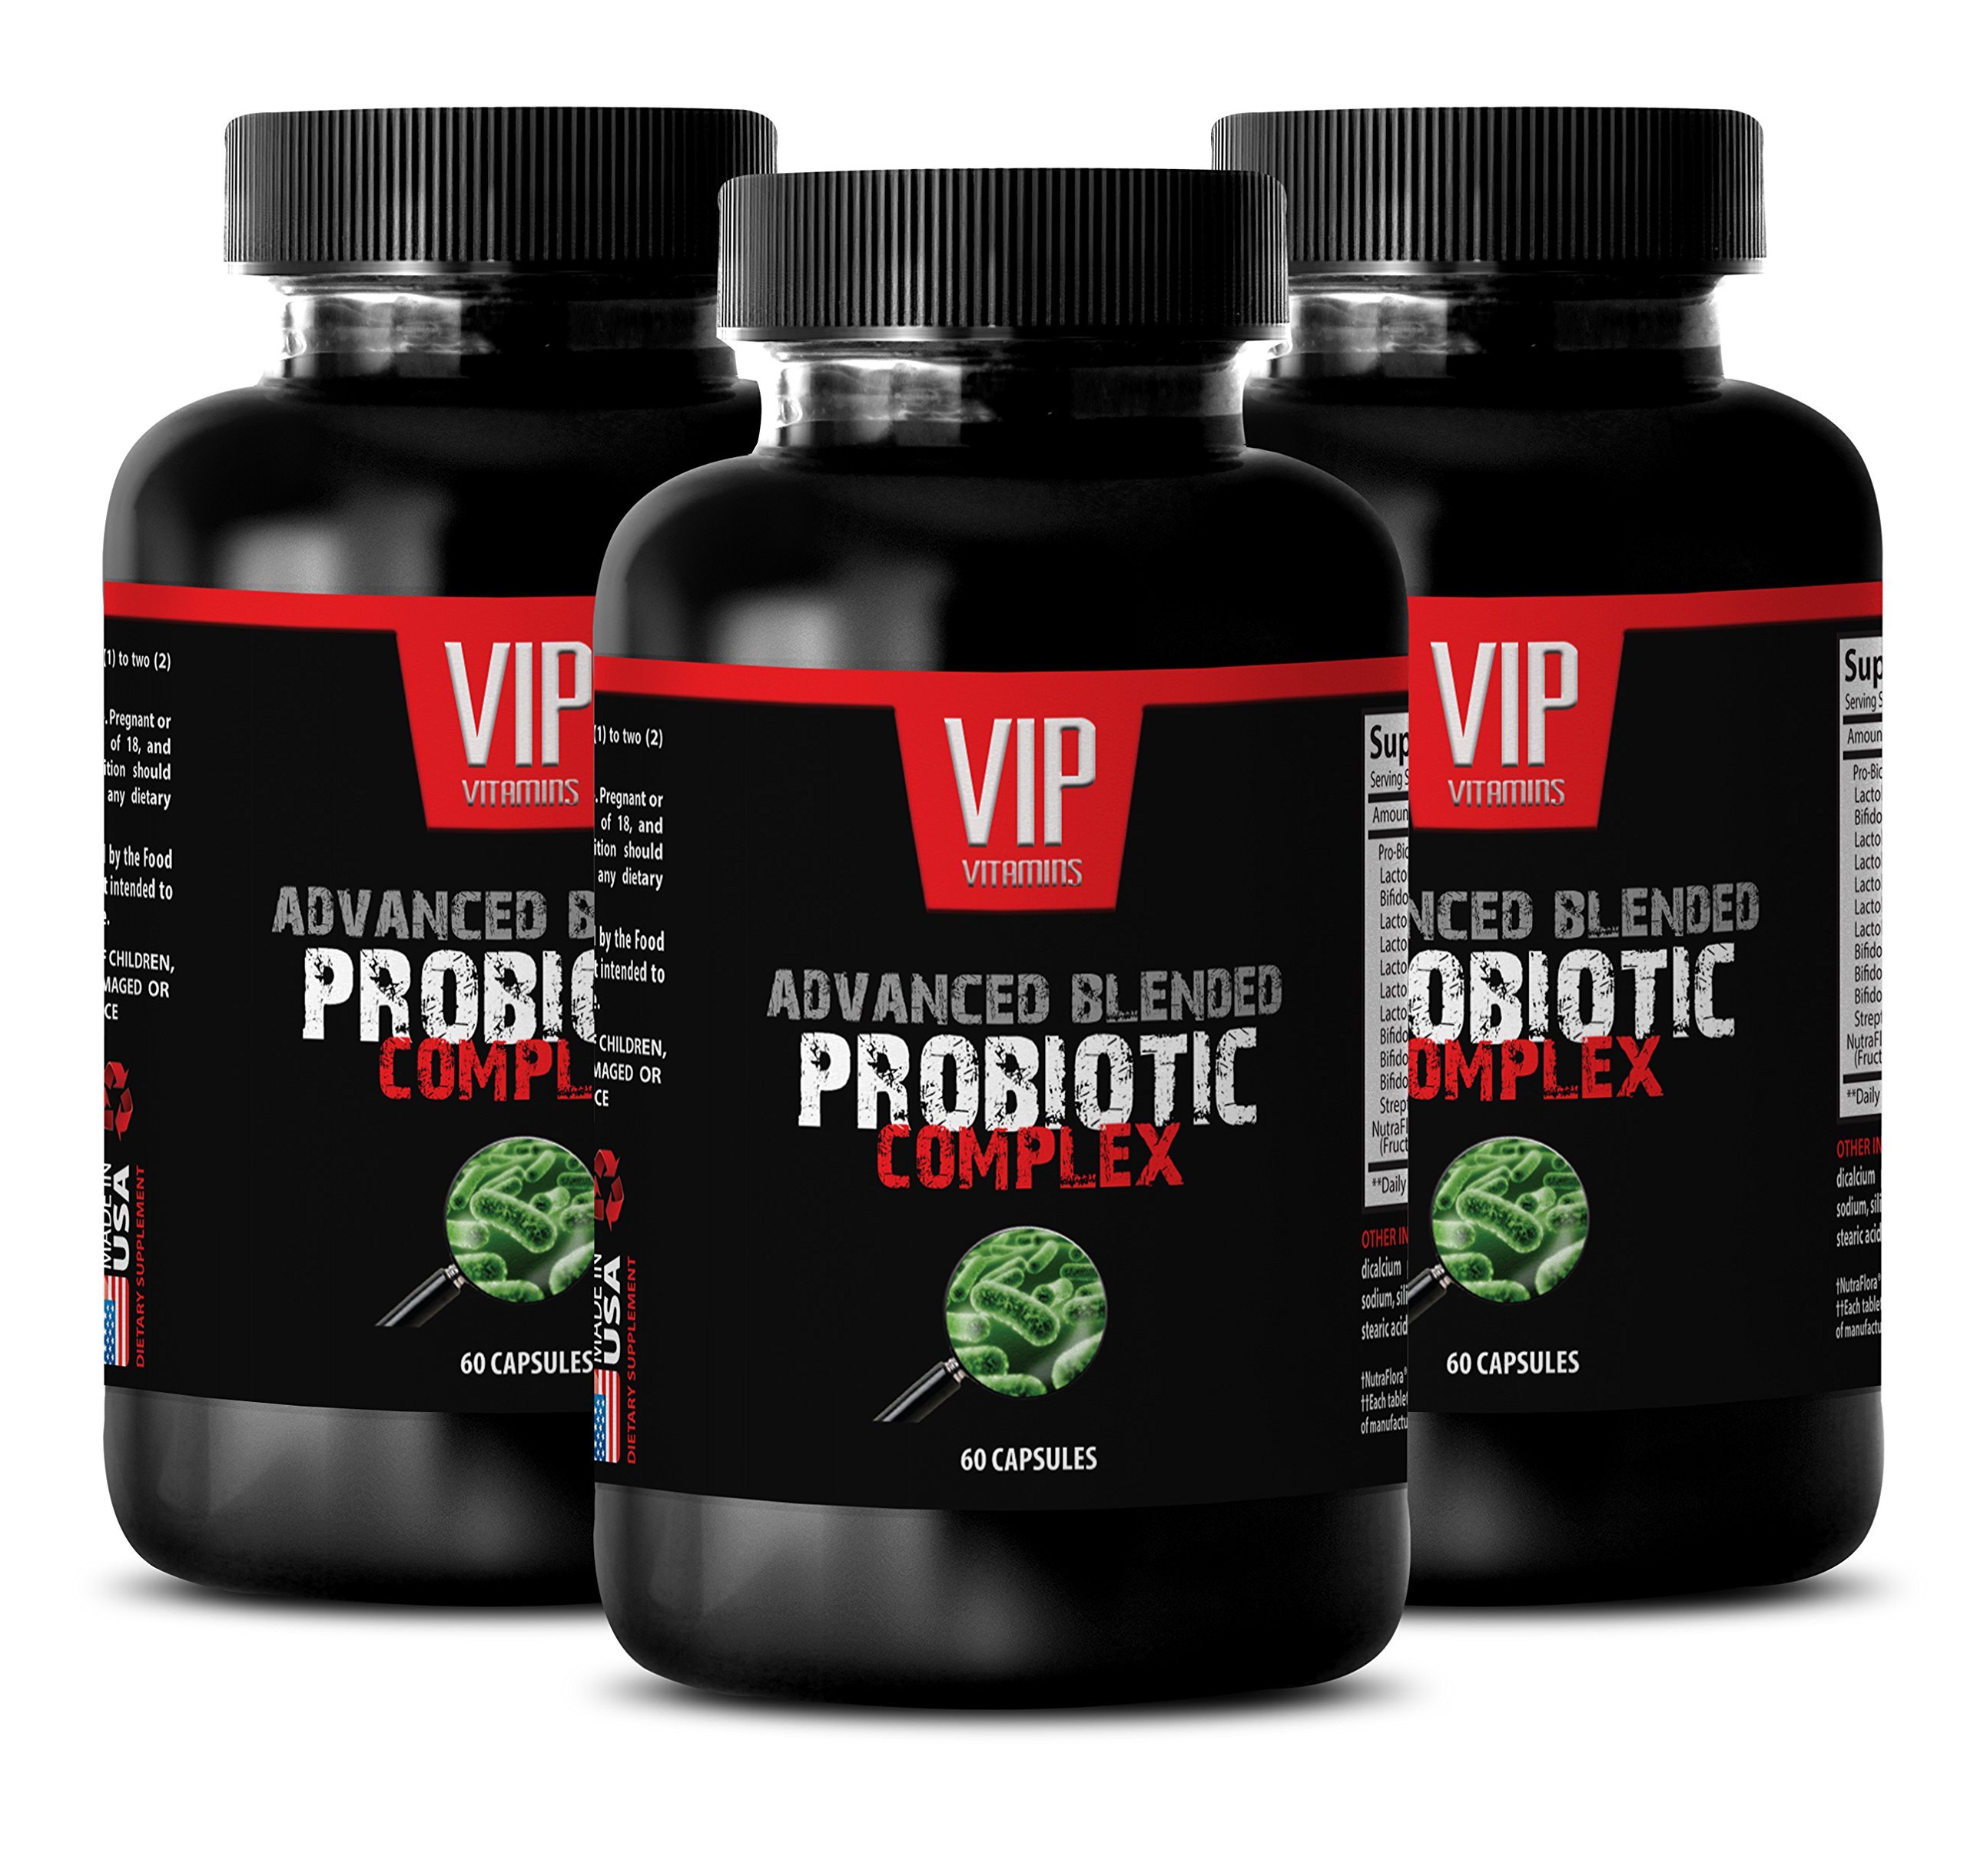 Probiotic Gas and Bloating â Advanced Blended PROBIOTIC ...